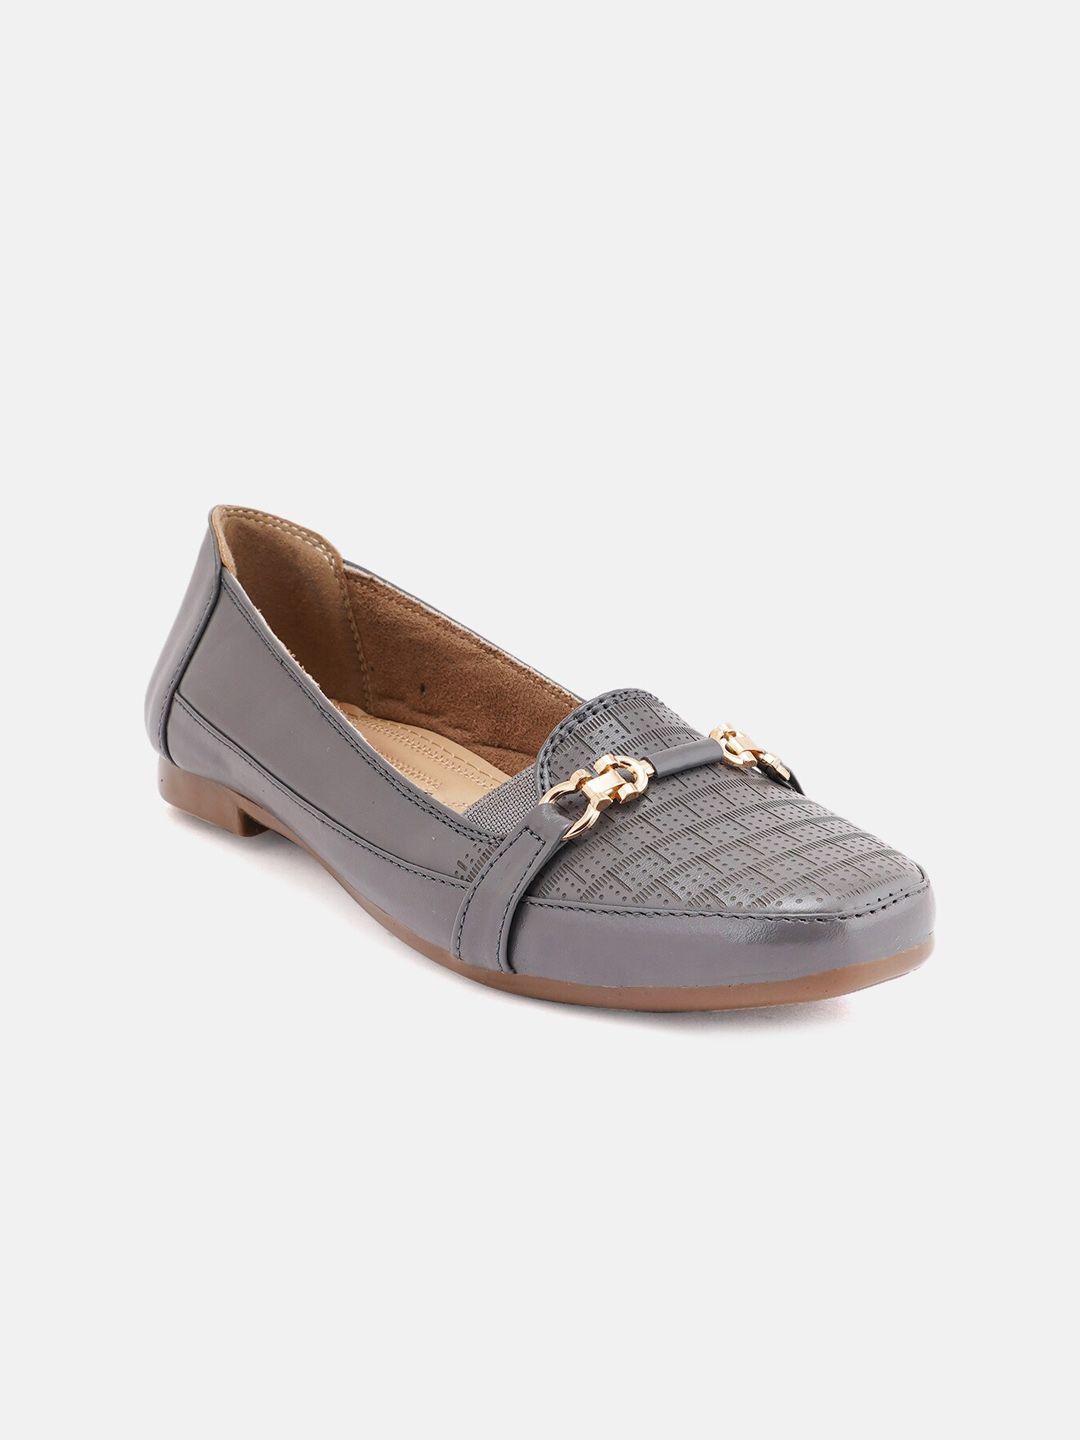 mast & harbour women grey ballerinas with bows flats